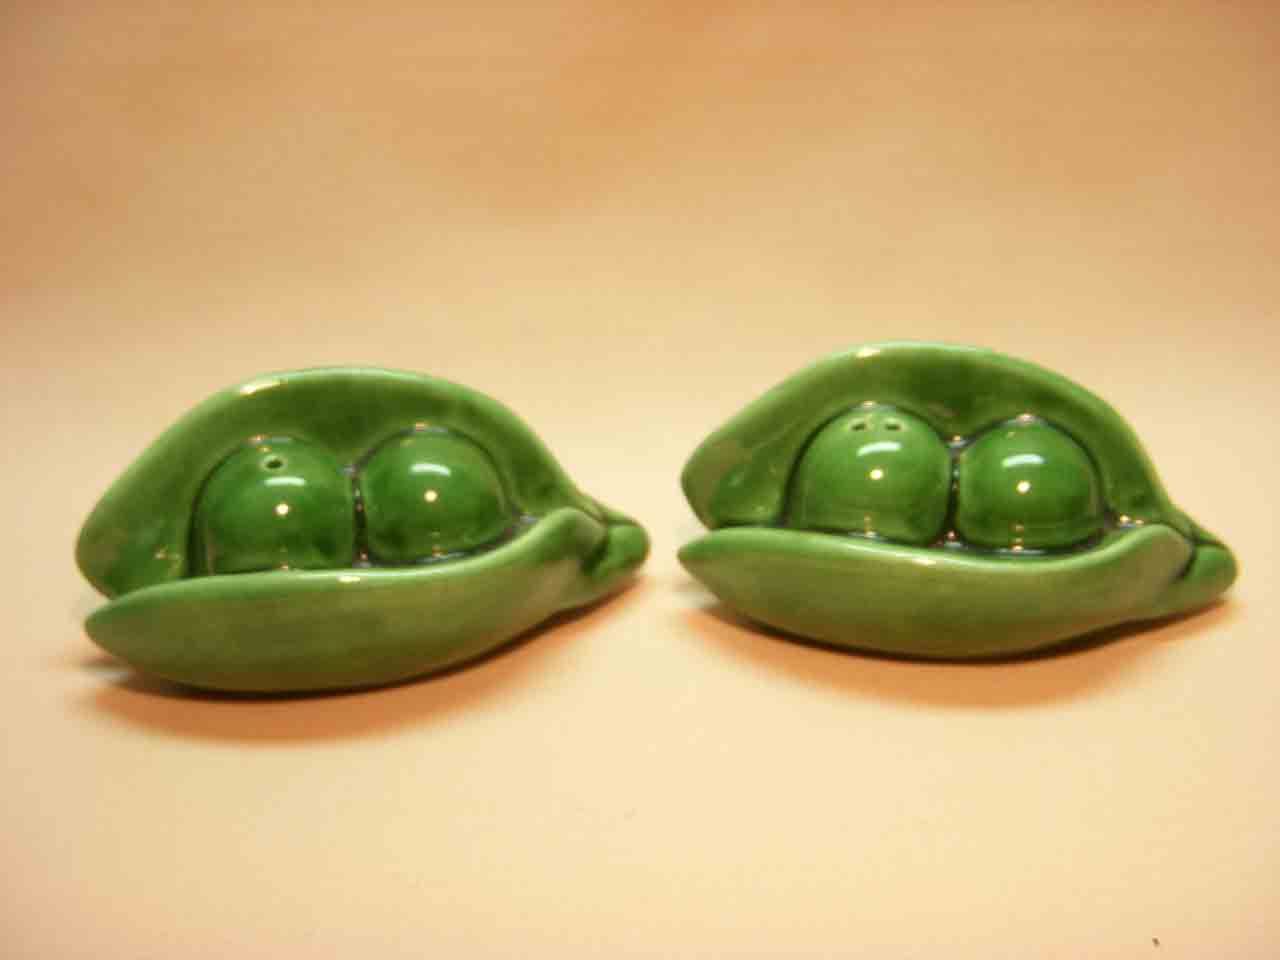 Vallona Starr two peas in a pod salt and pepper shakers